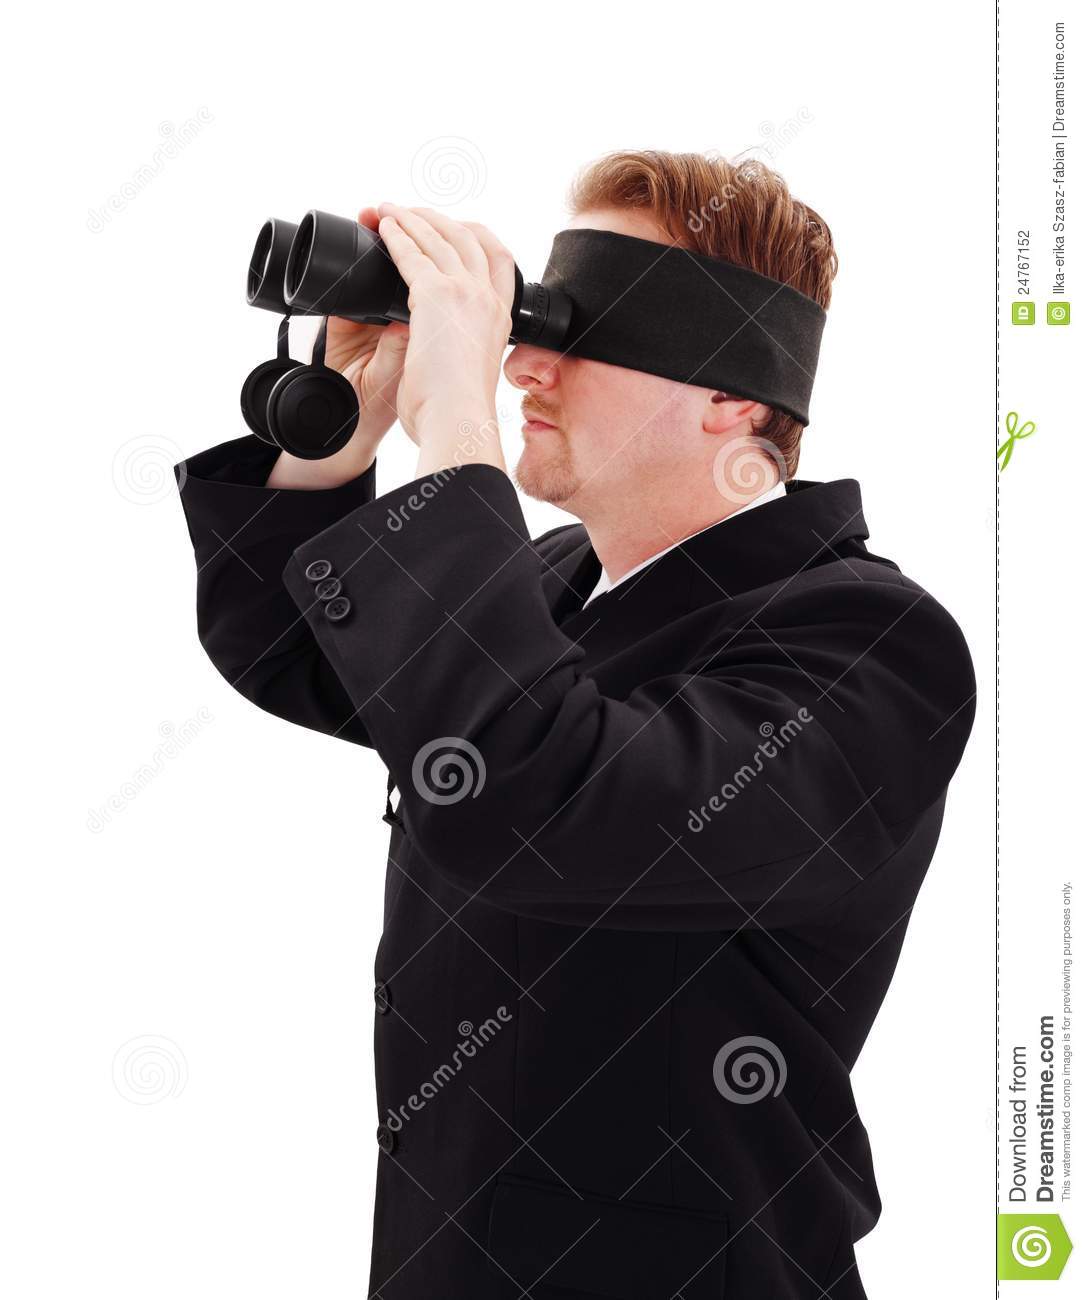 Blindfold Bussiness Man Looking For Job Stock Photography   Image